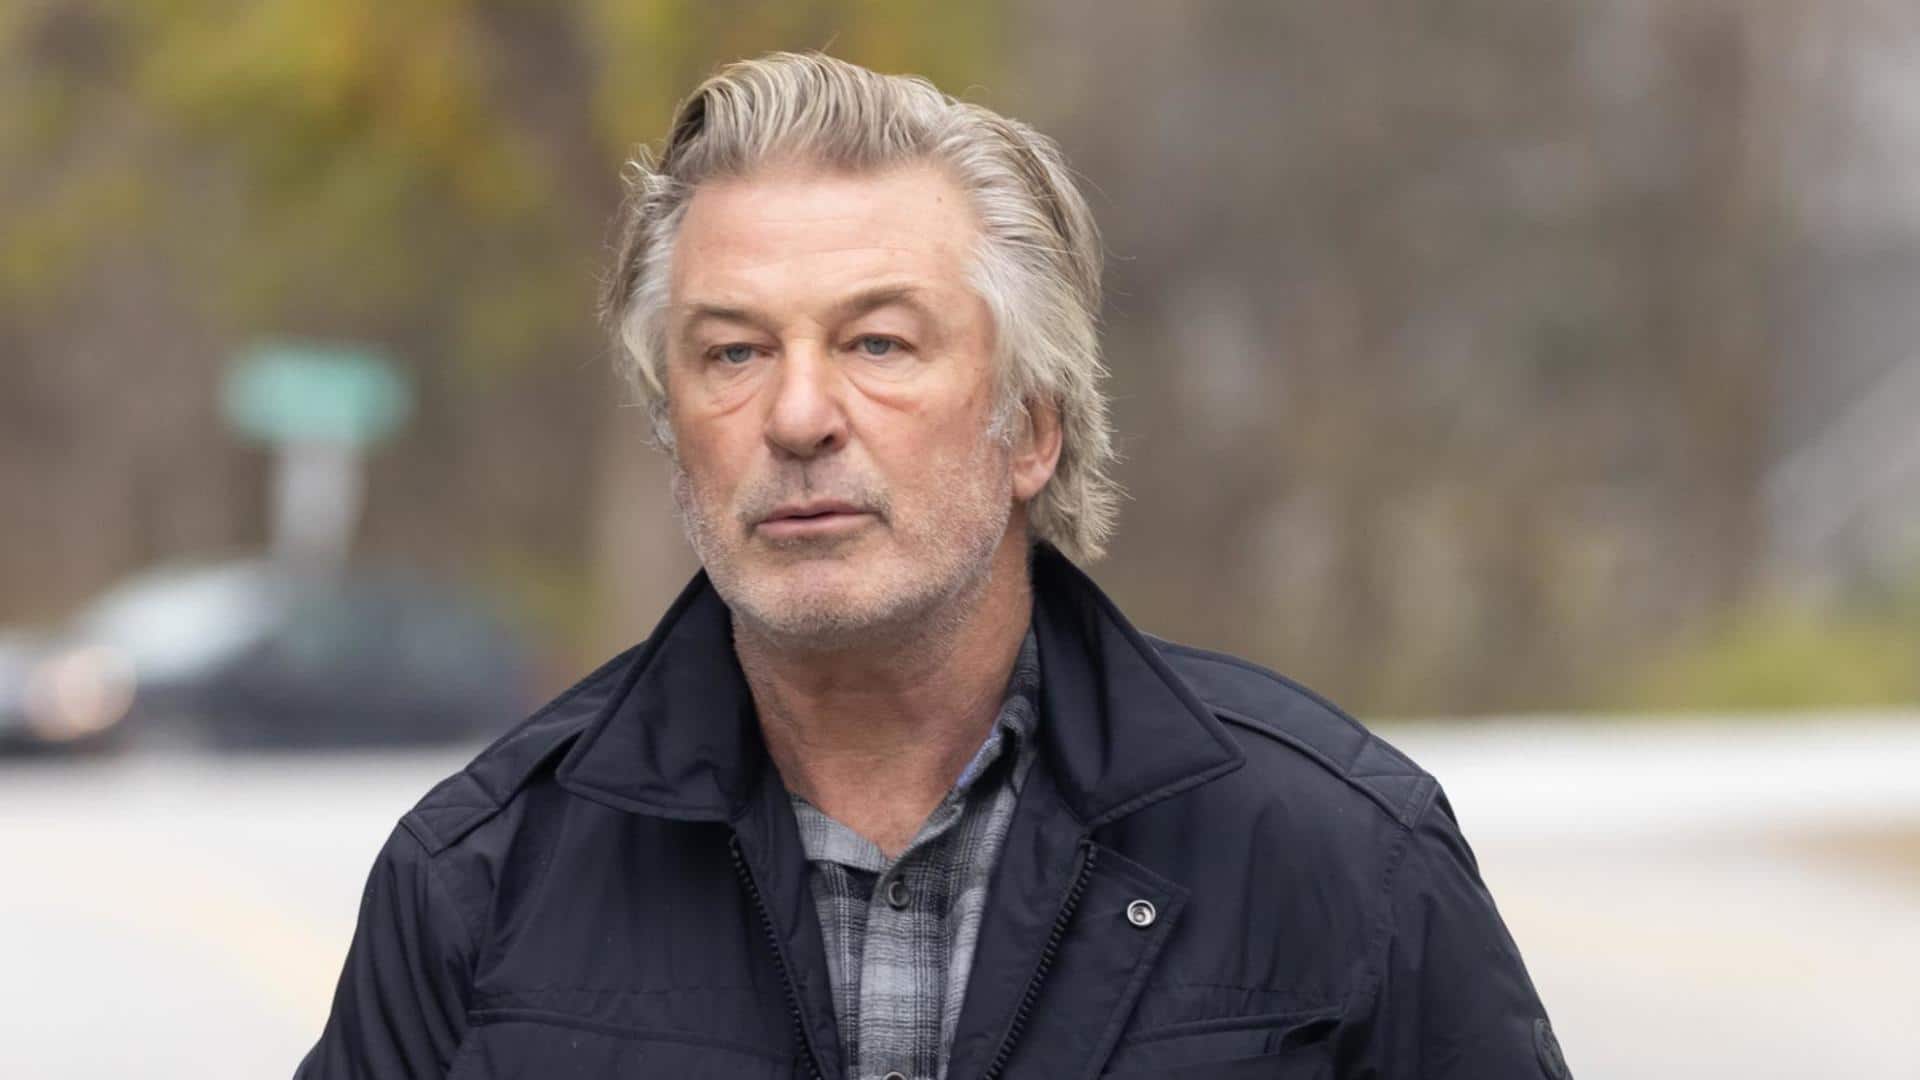 'Rust': Alec Baldwin pleads not guilty to manslaughter charges